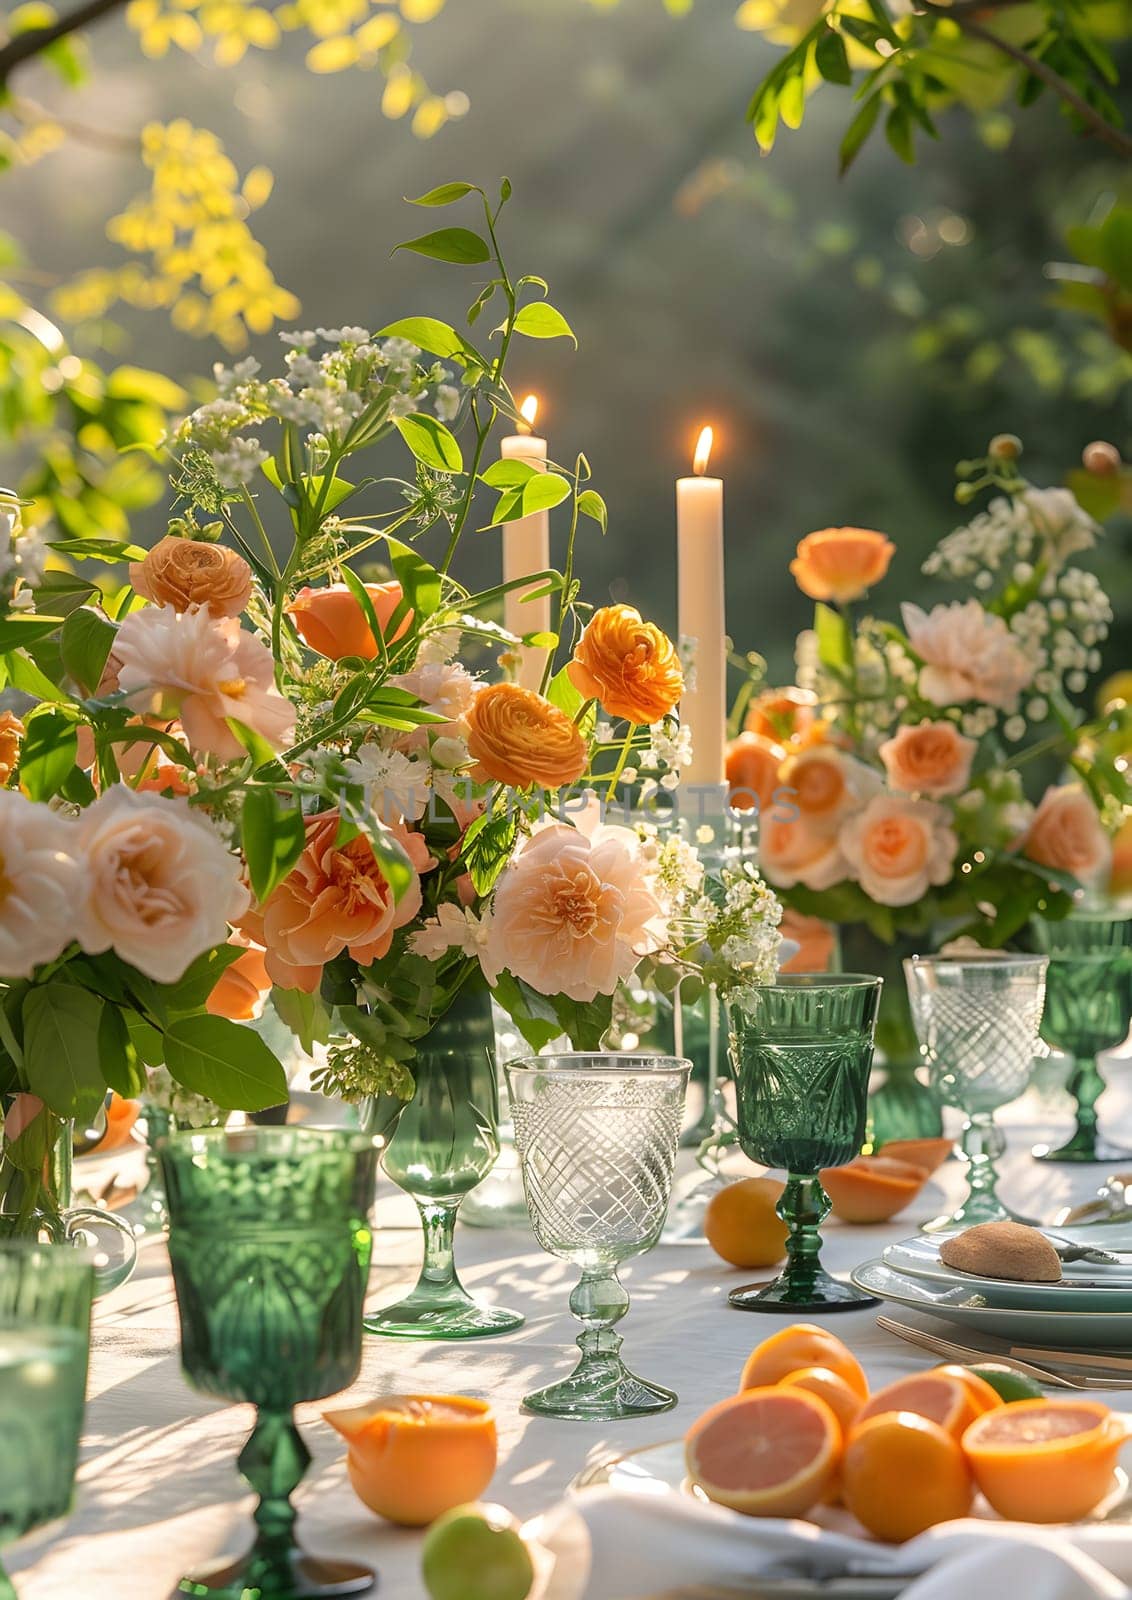 A beautifully arranged table featuring a centerpiece of hybrid tea roses in a vase, complemented by vibrant orange clementines, candles, and green glasses